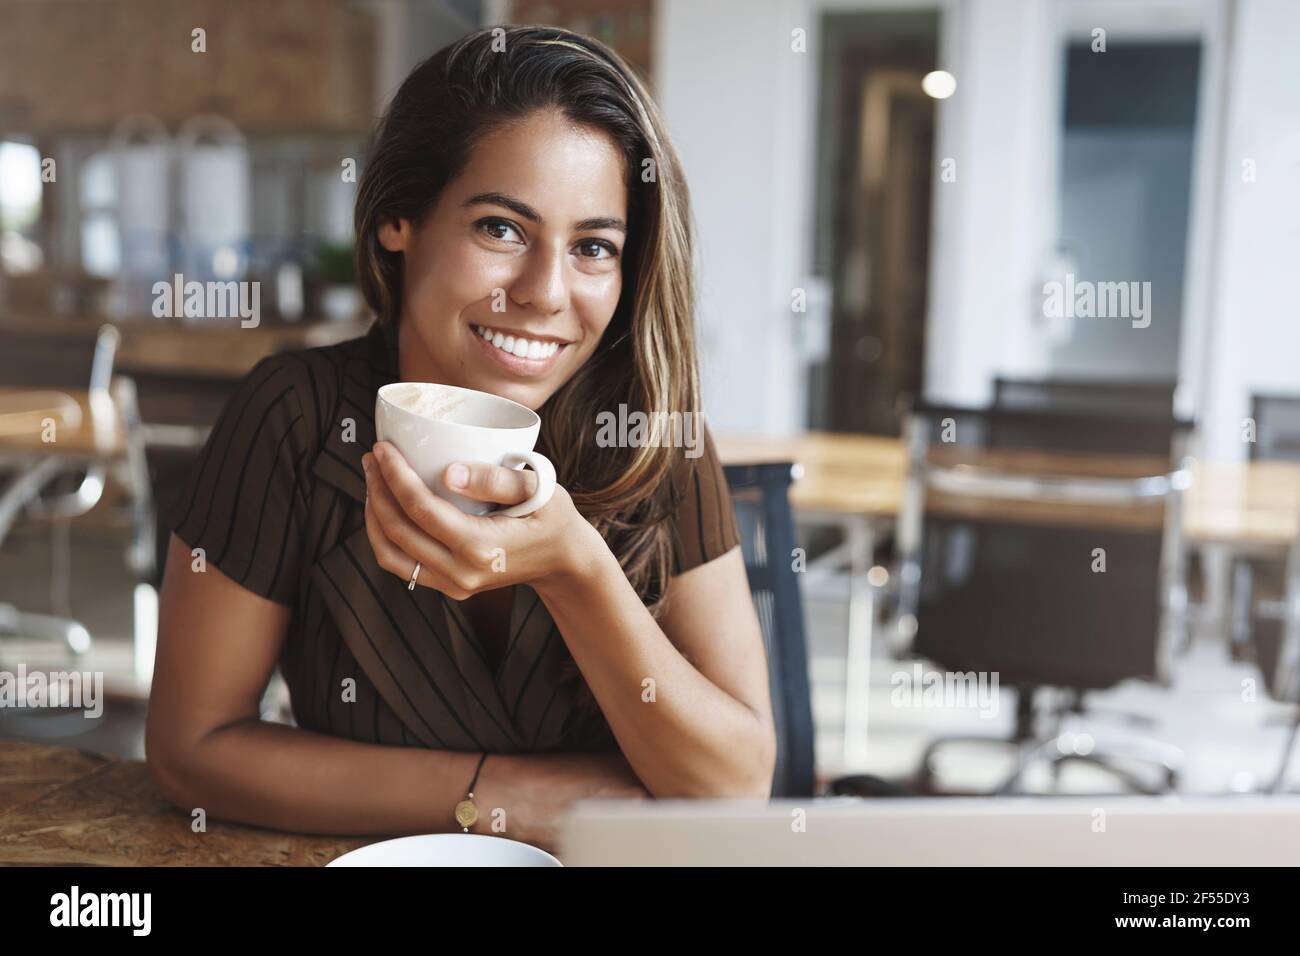 Wellbeing, success, happiness concept. Adorable smiling happy young tanned woman pierced nose hold coffee cup grinning joyfully camera sit cafe table Stock Photo